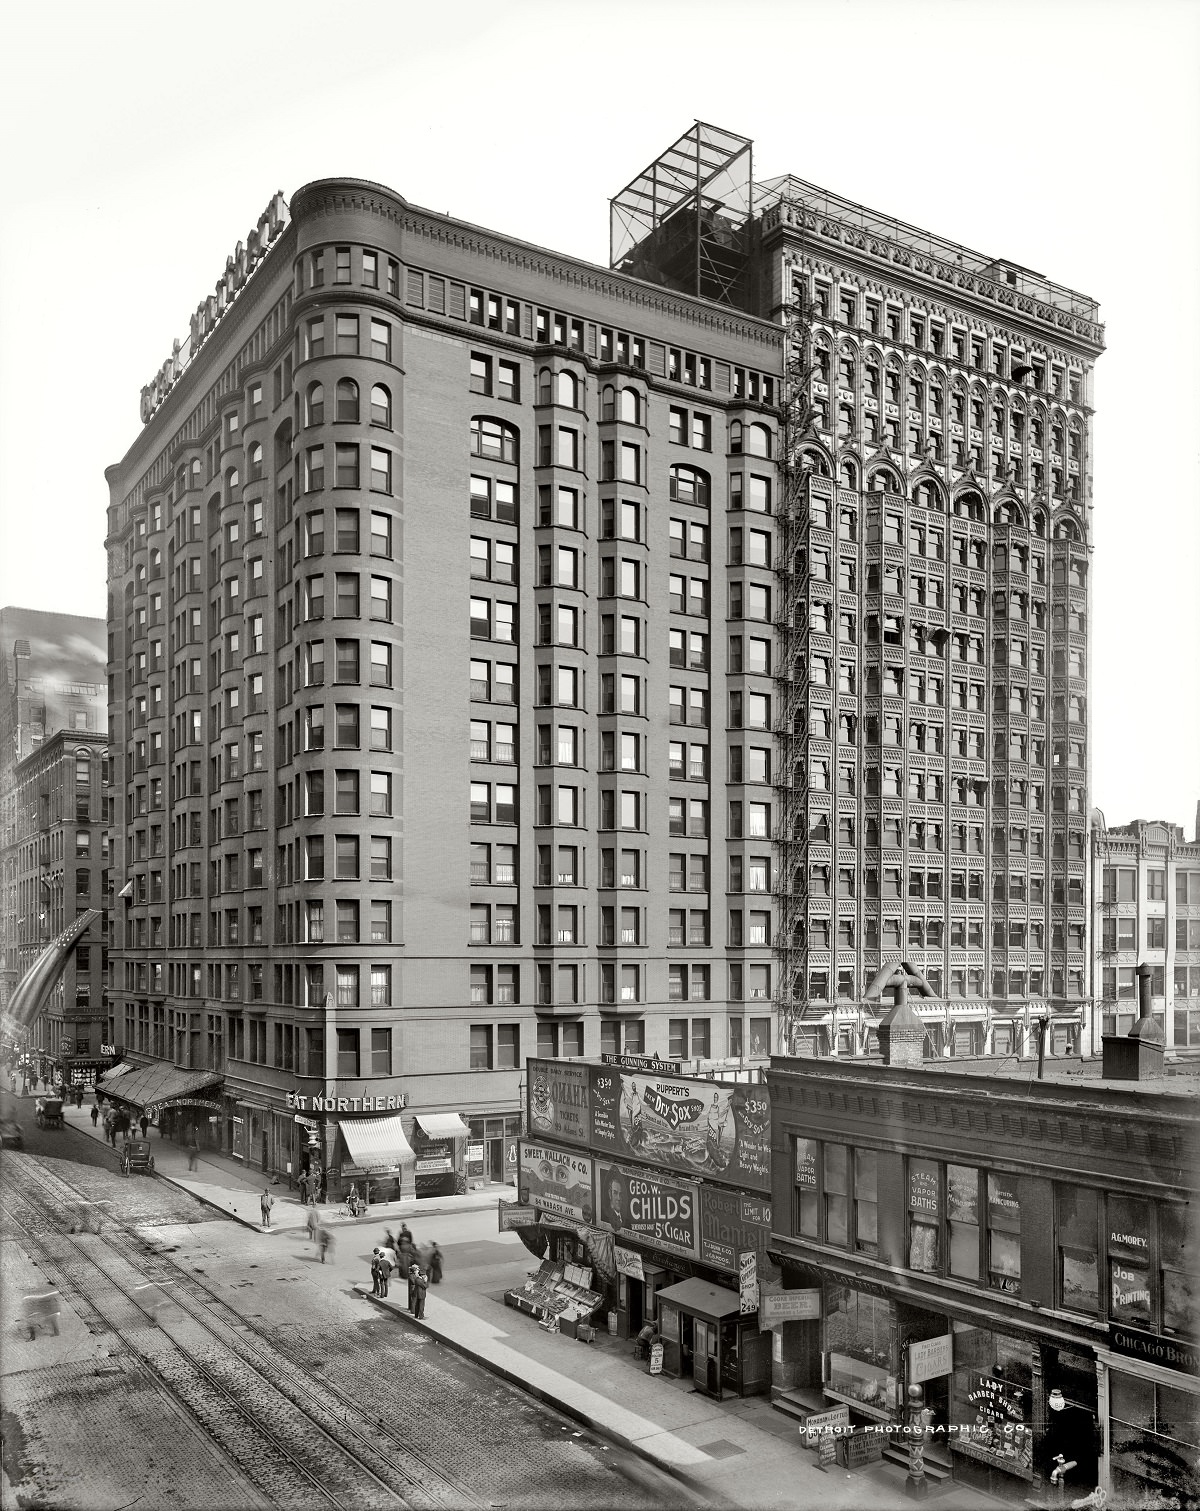 Great Northern Hotel and office building, Chicago circa 1895-1900.